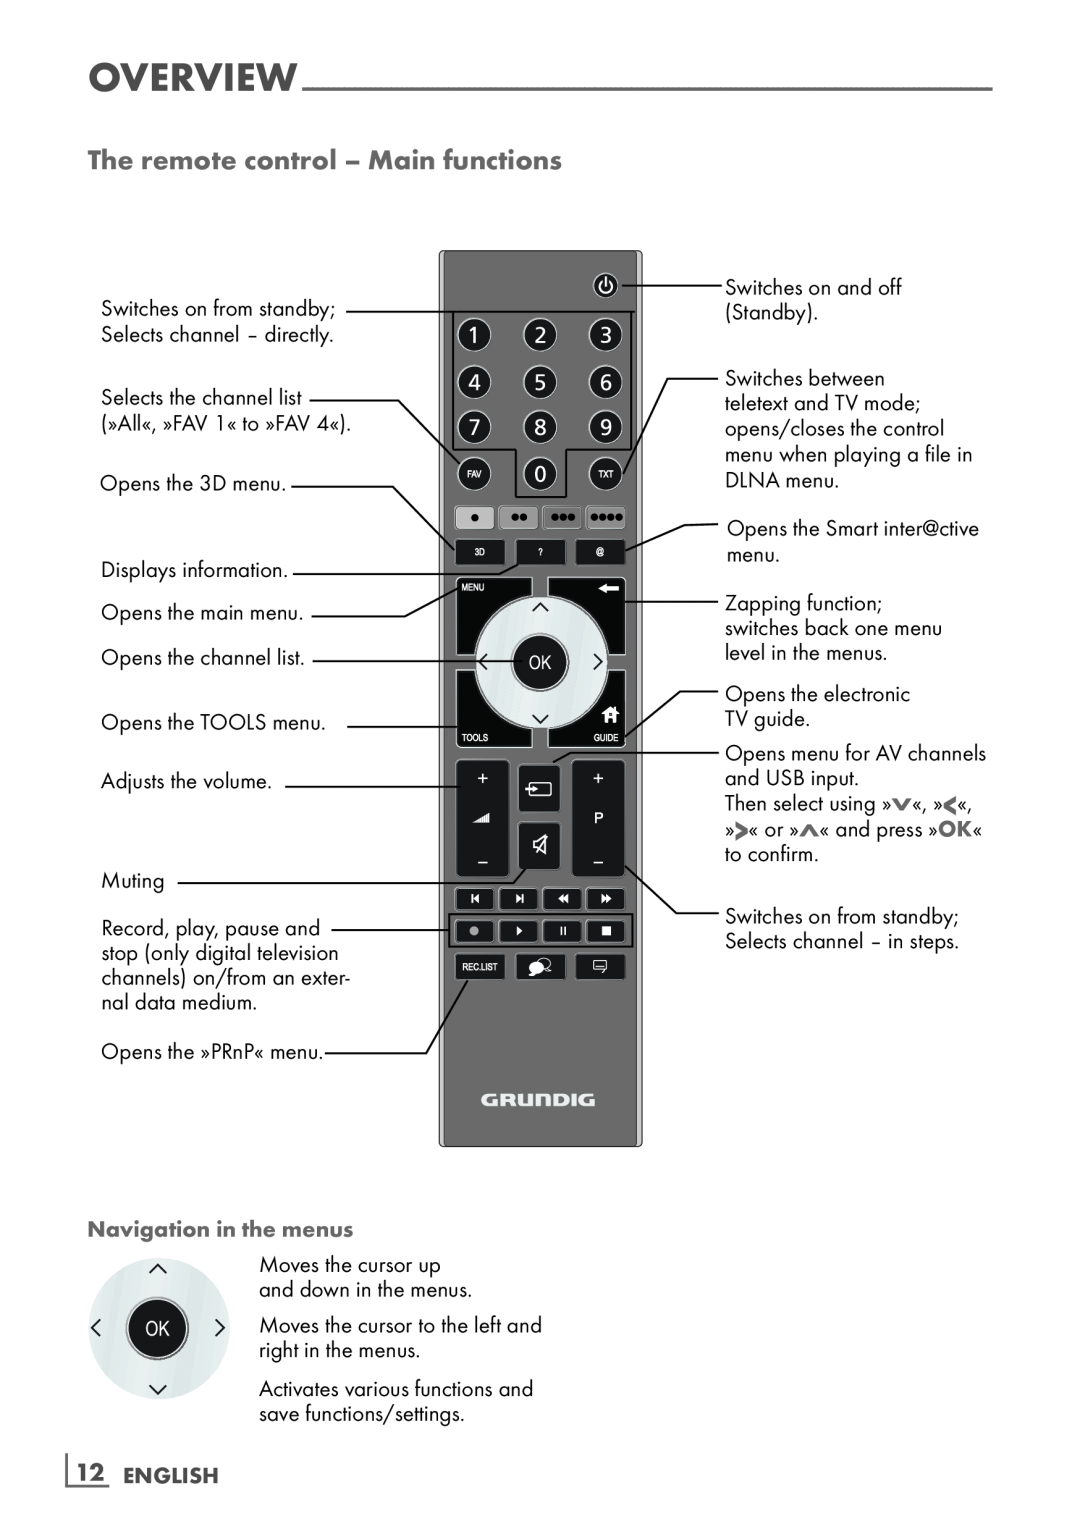 Grundig 40 VLE 8160 BL manual The remote control - Main functions, ­12 ENGLISH, Navigation in the menus 